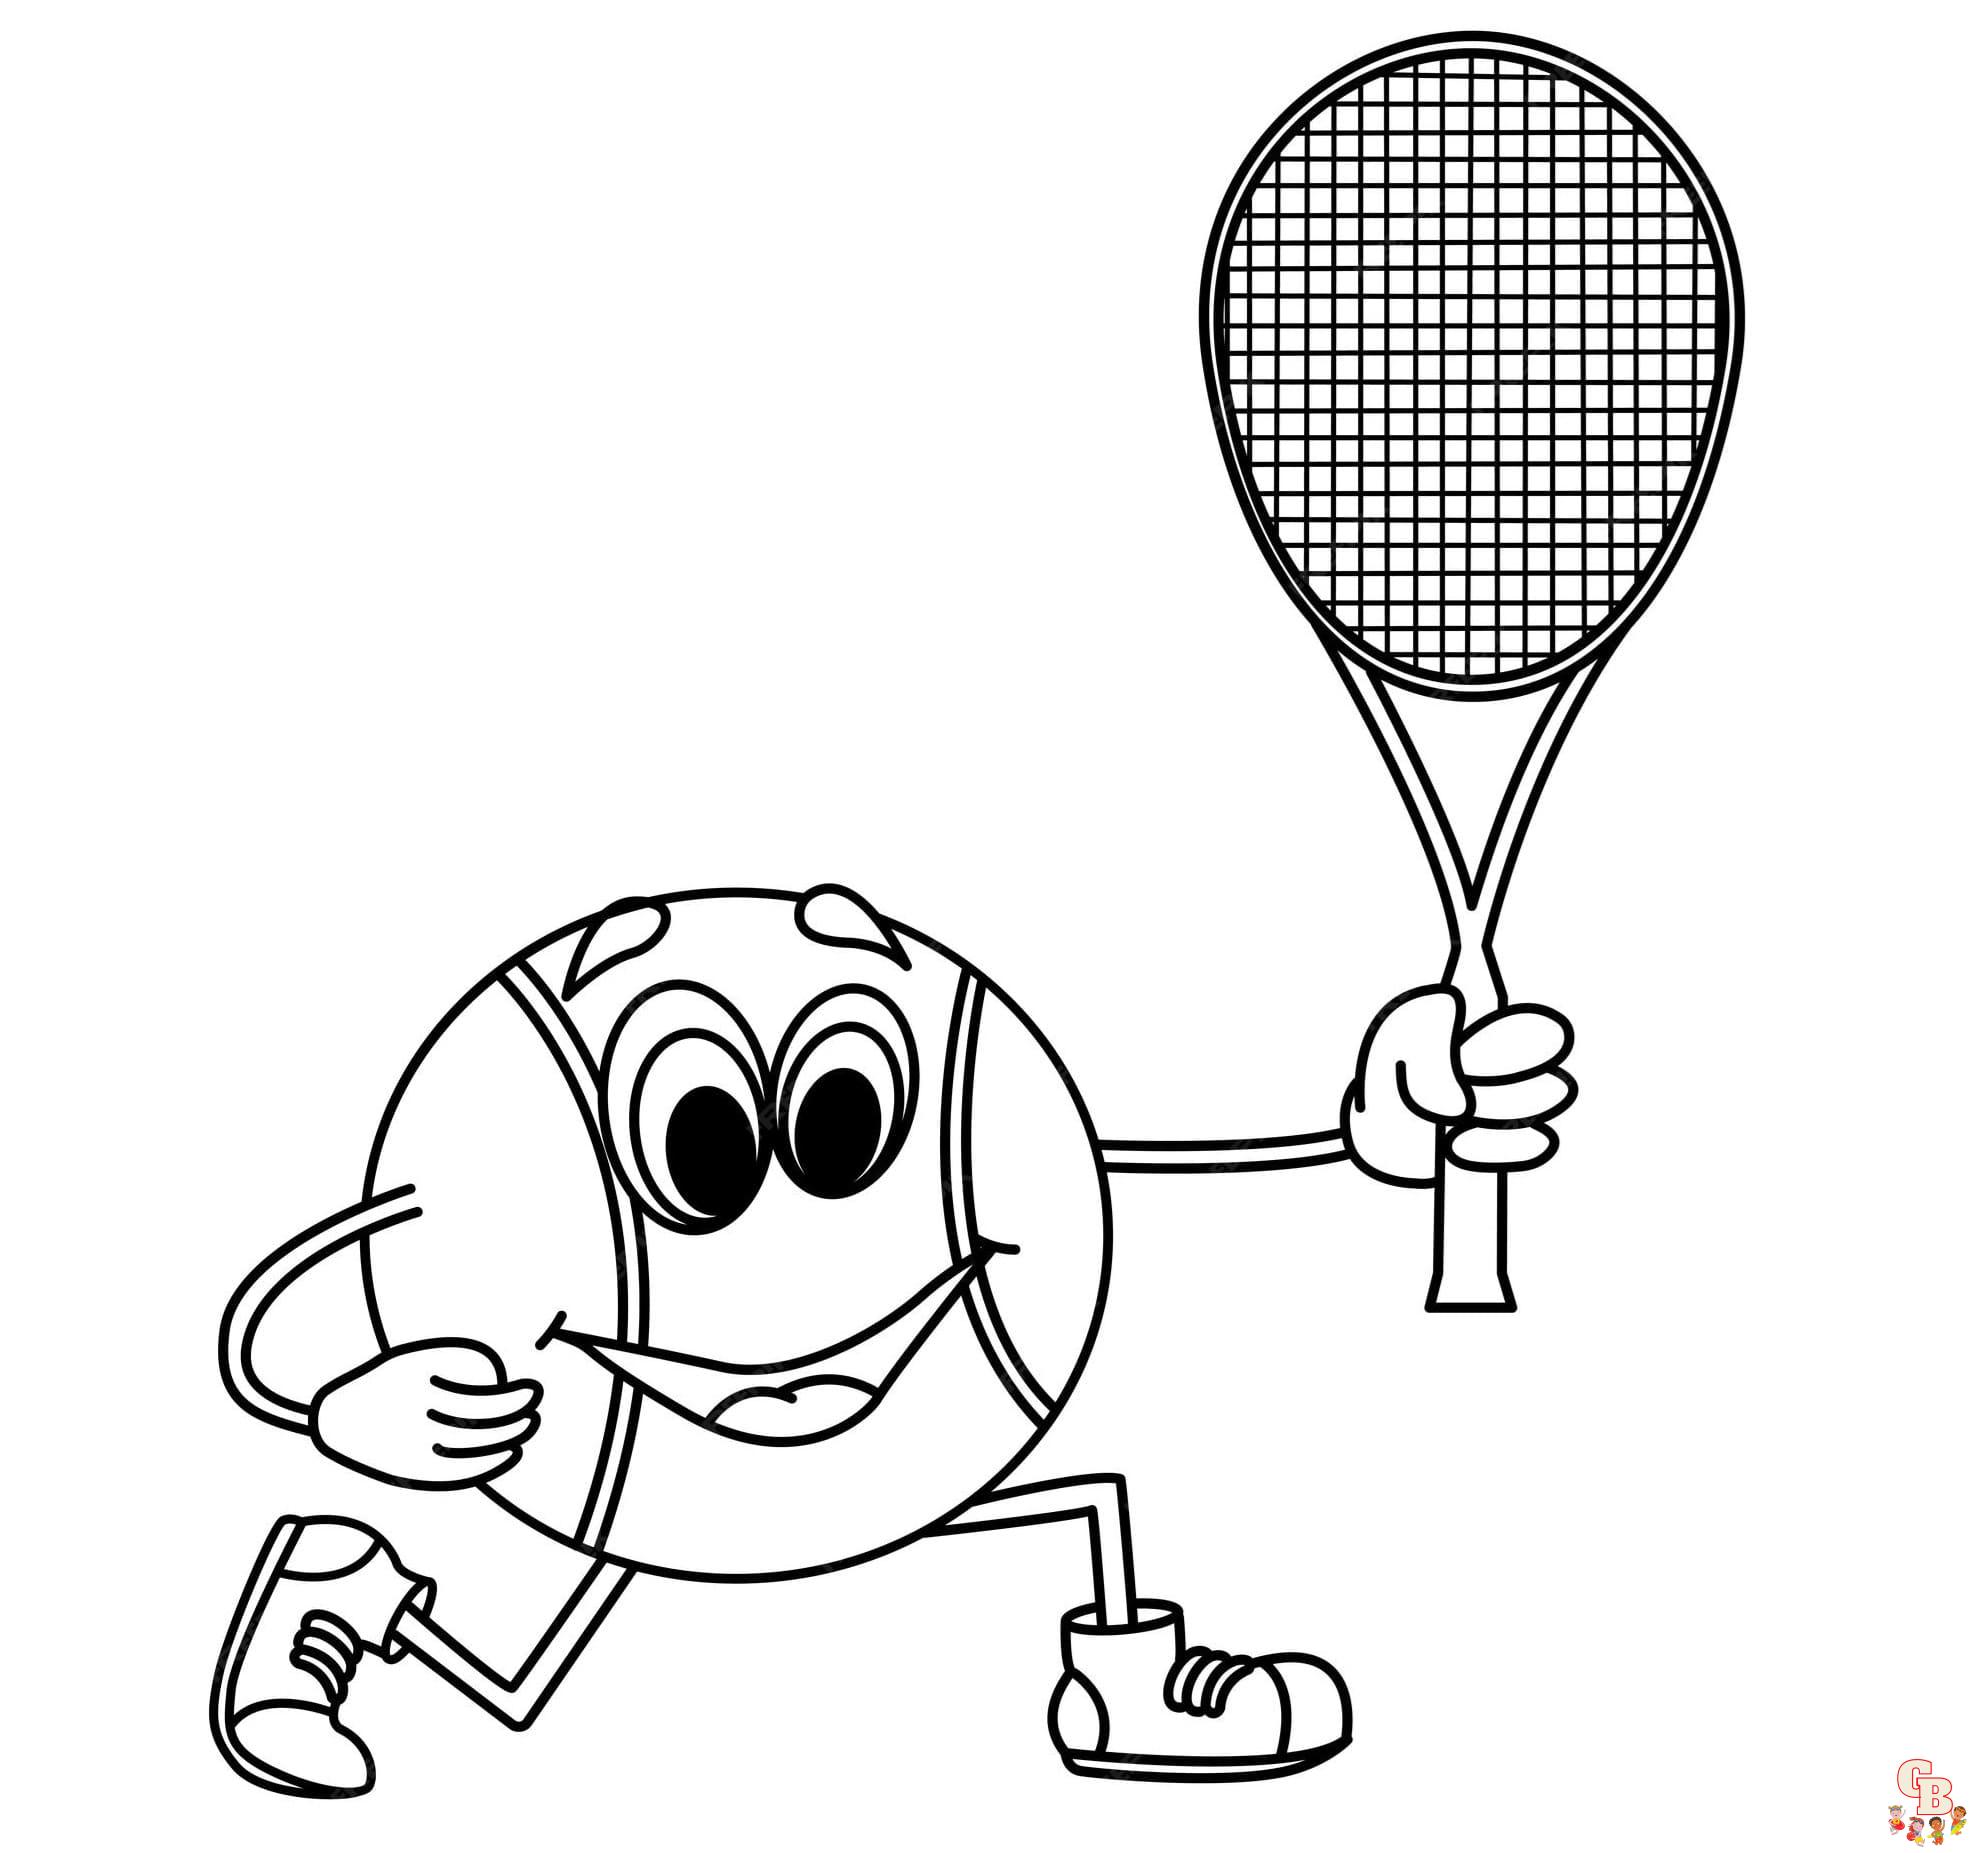 Free tennis coloring pages for kids